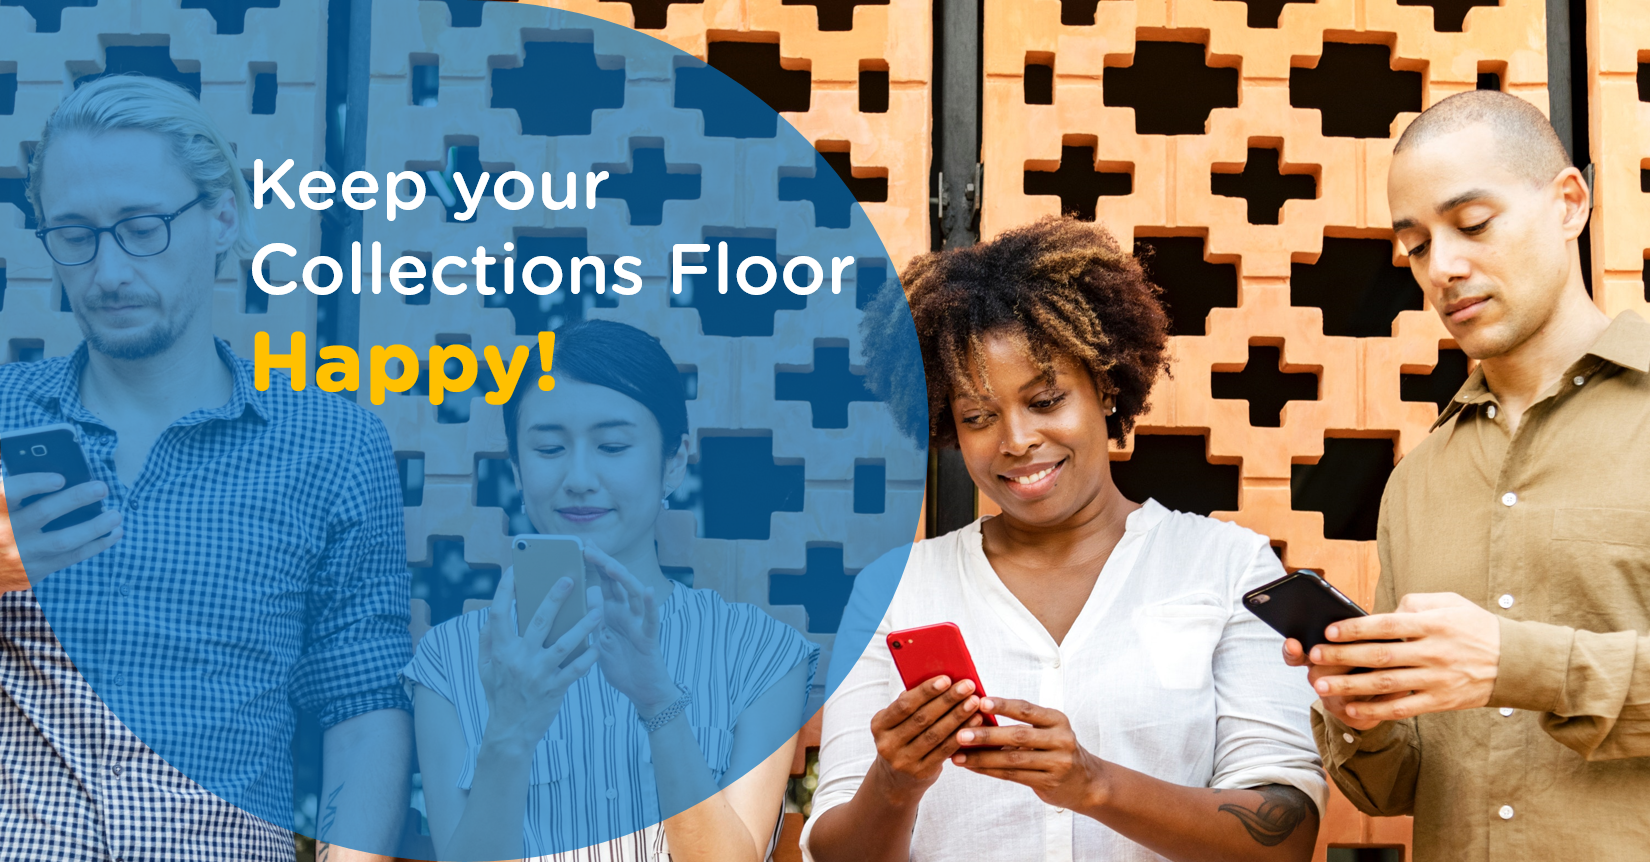 Keep your collections floor happy!